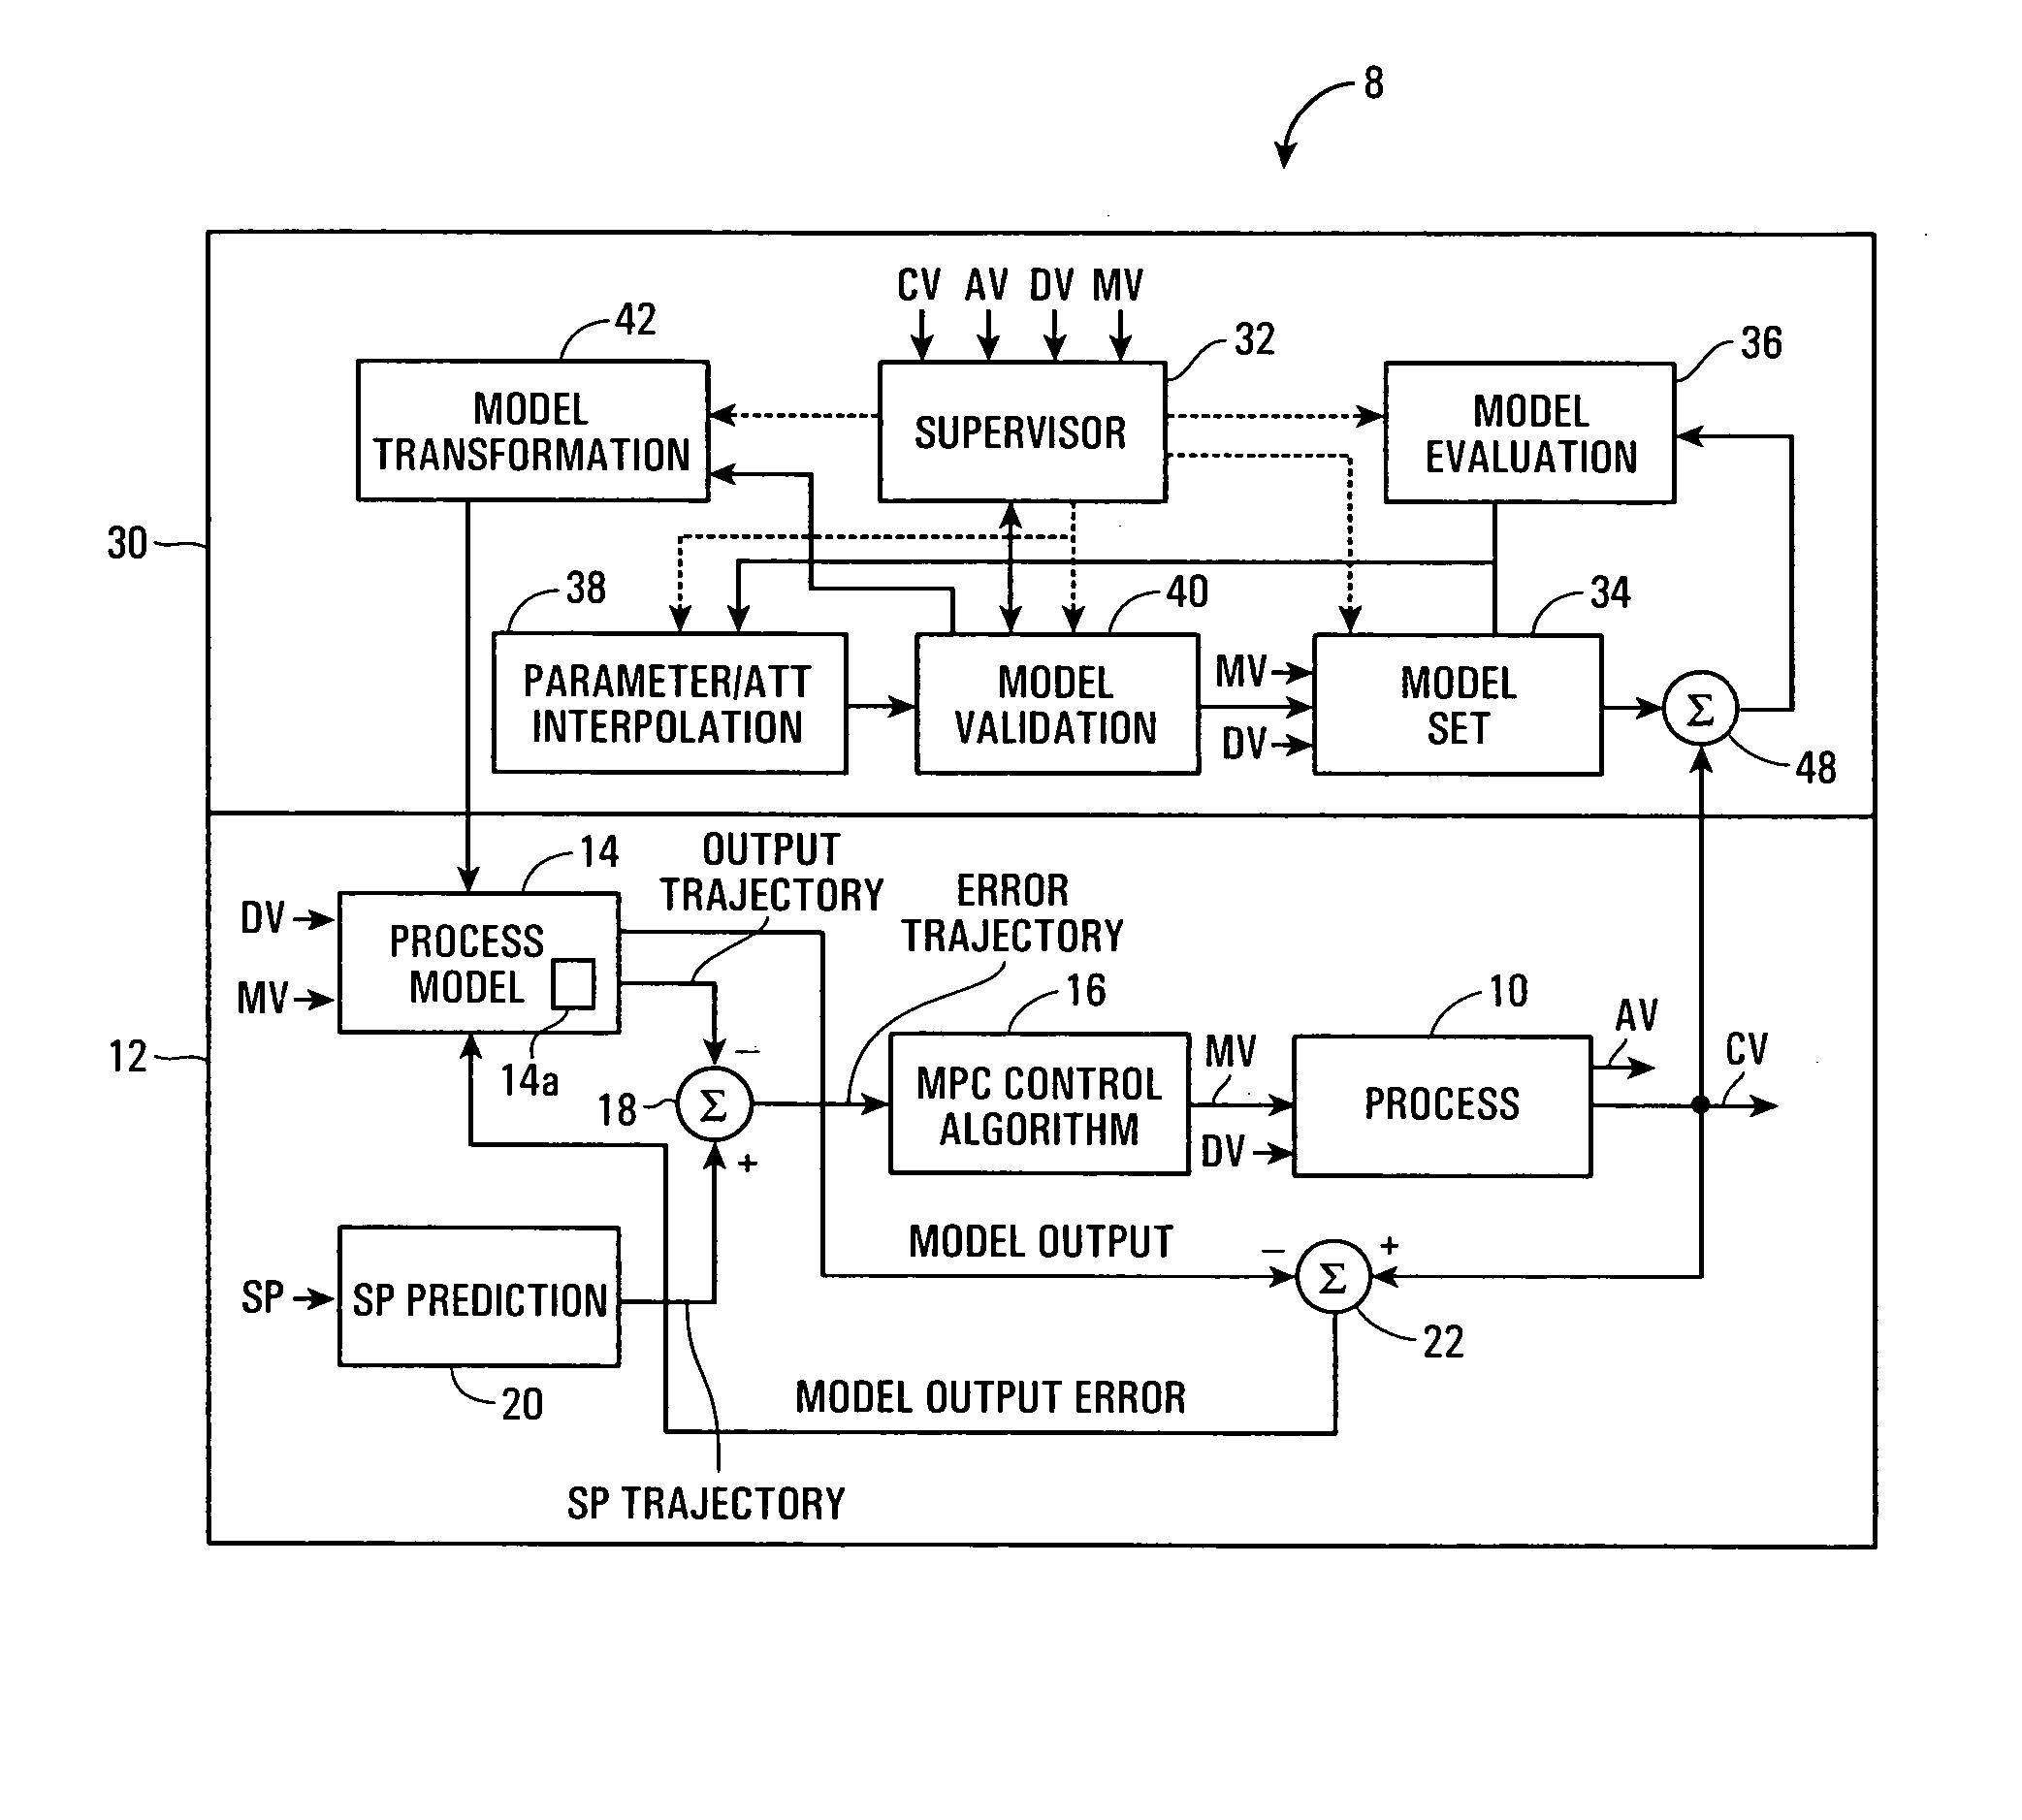 Adaptive multivariable process controller using model switching and attribute interpolation